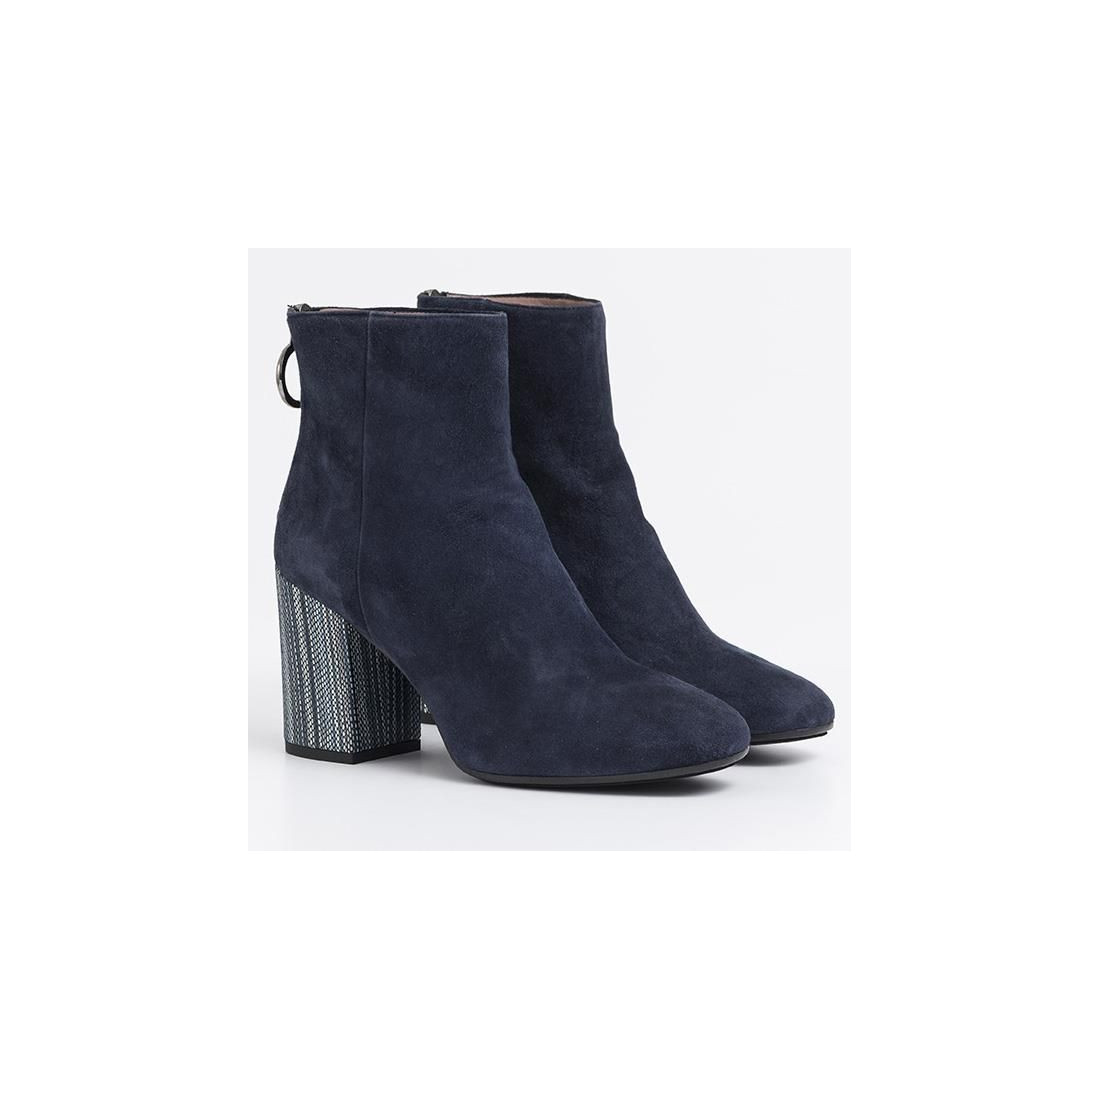 Grace ankle boots in blue suede